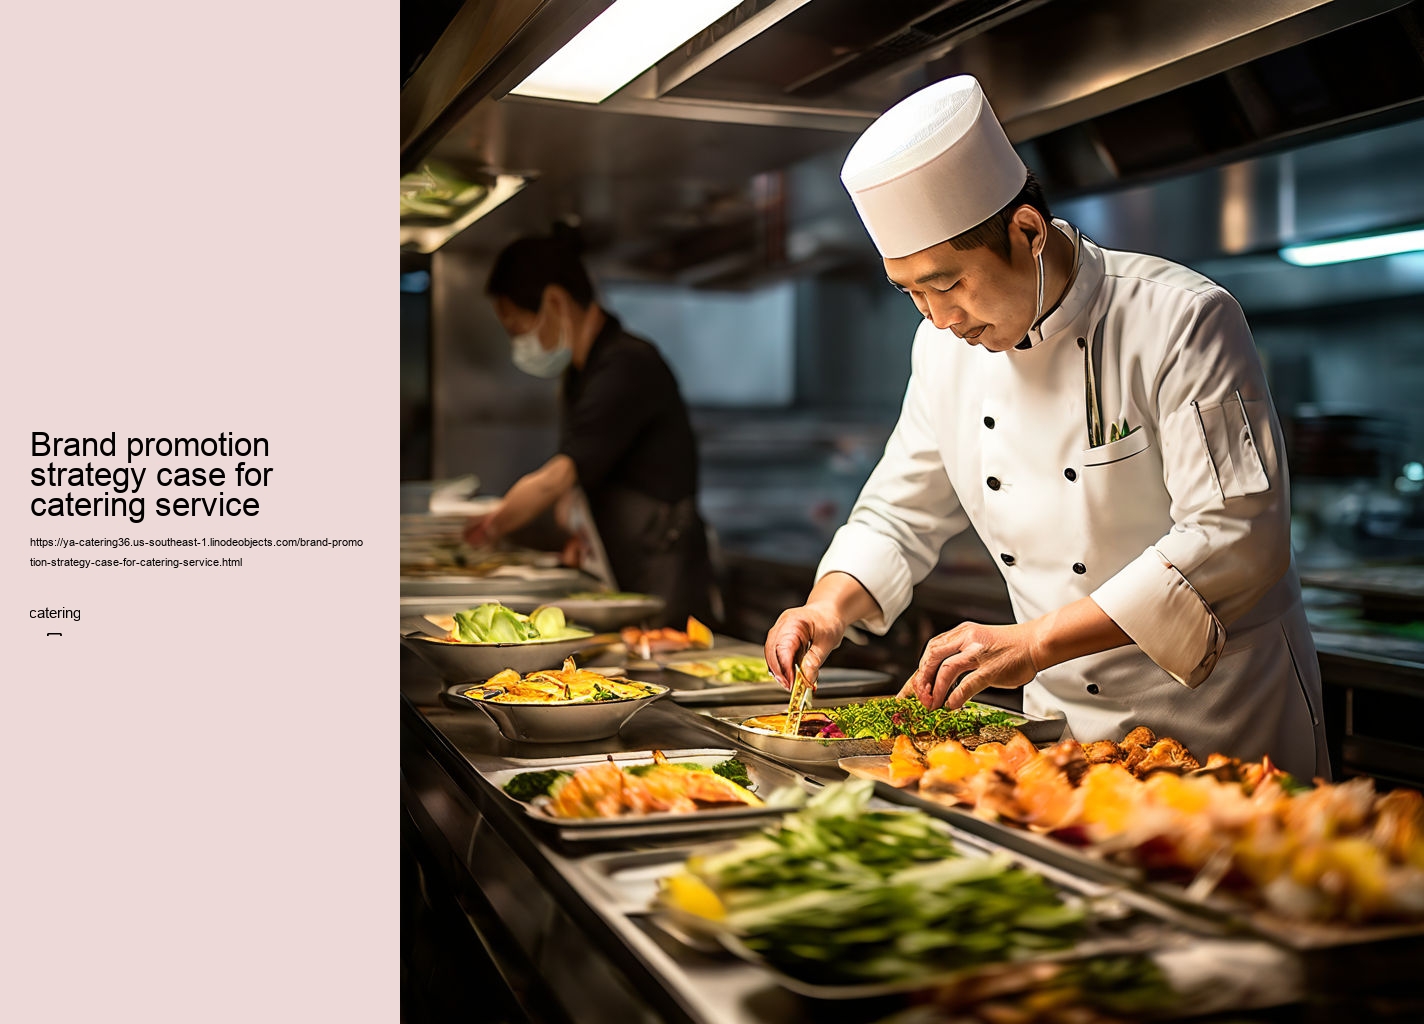 Brand promotion strategy case for catering service